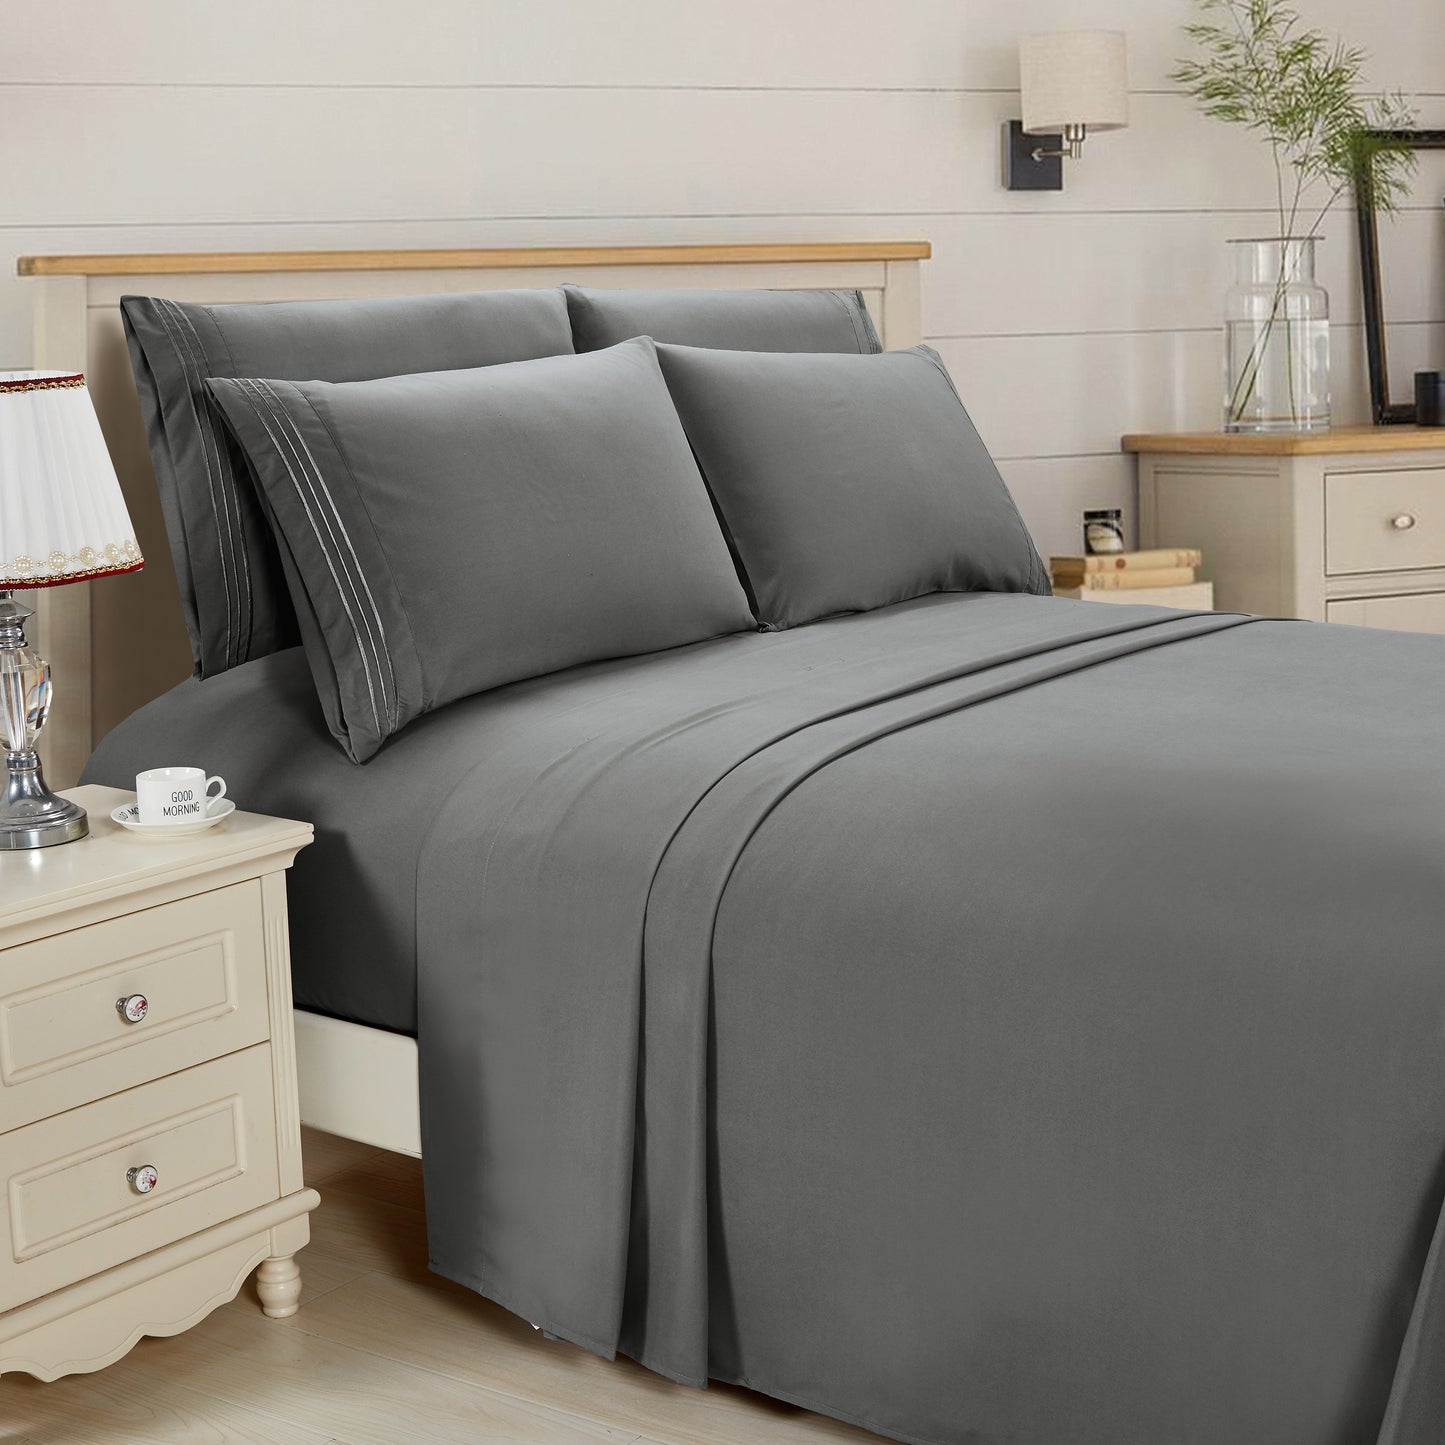 Elegant Comfort Essential 6-Piece 3-Line Embroidery Sheet Set, Soft as a Hotel Premium Quality,  Moody Shades